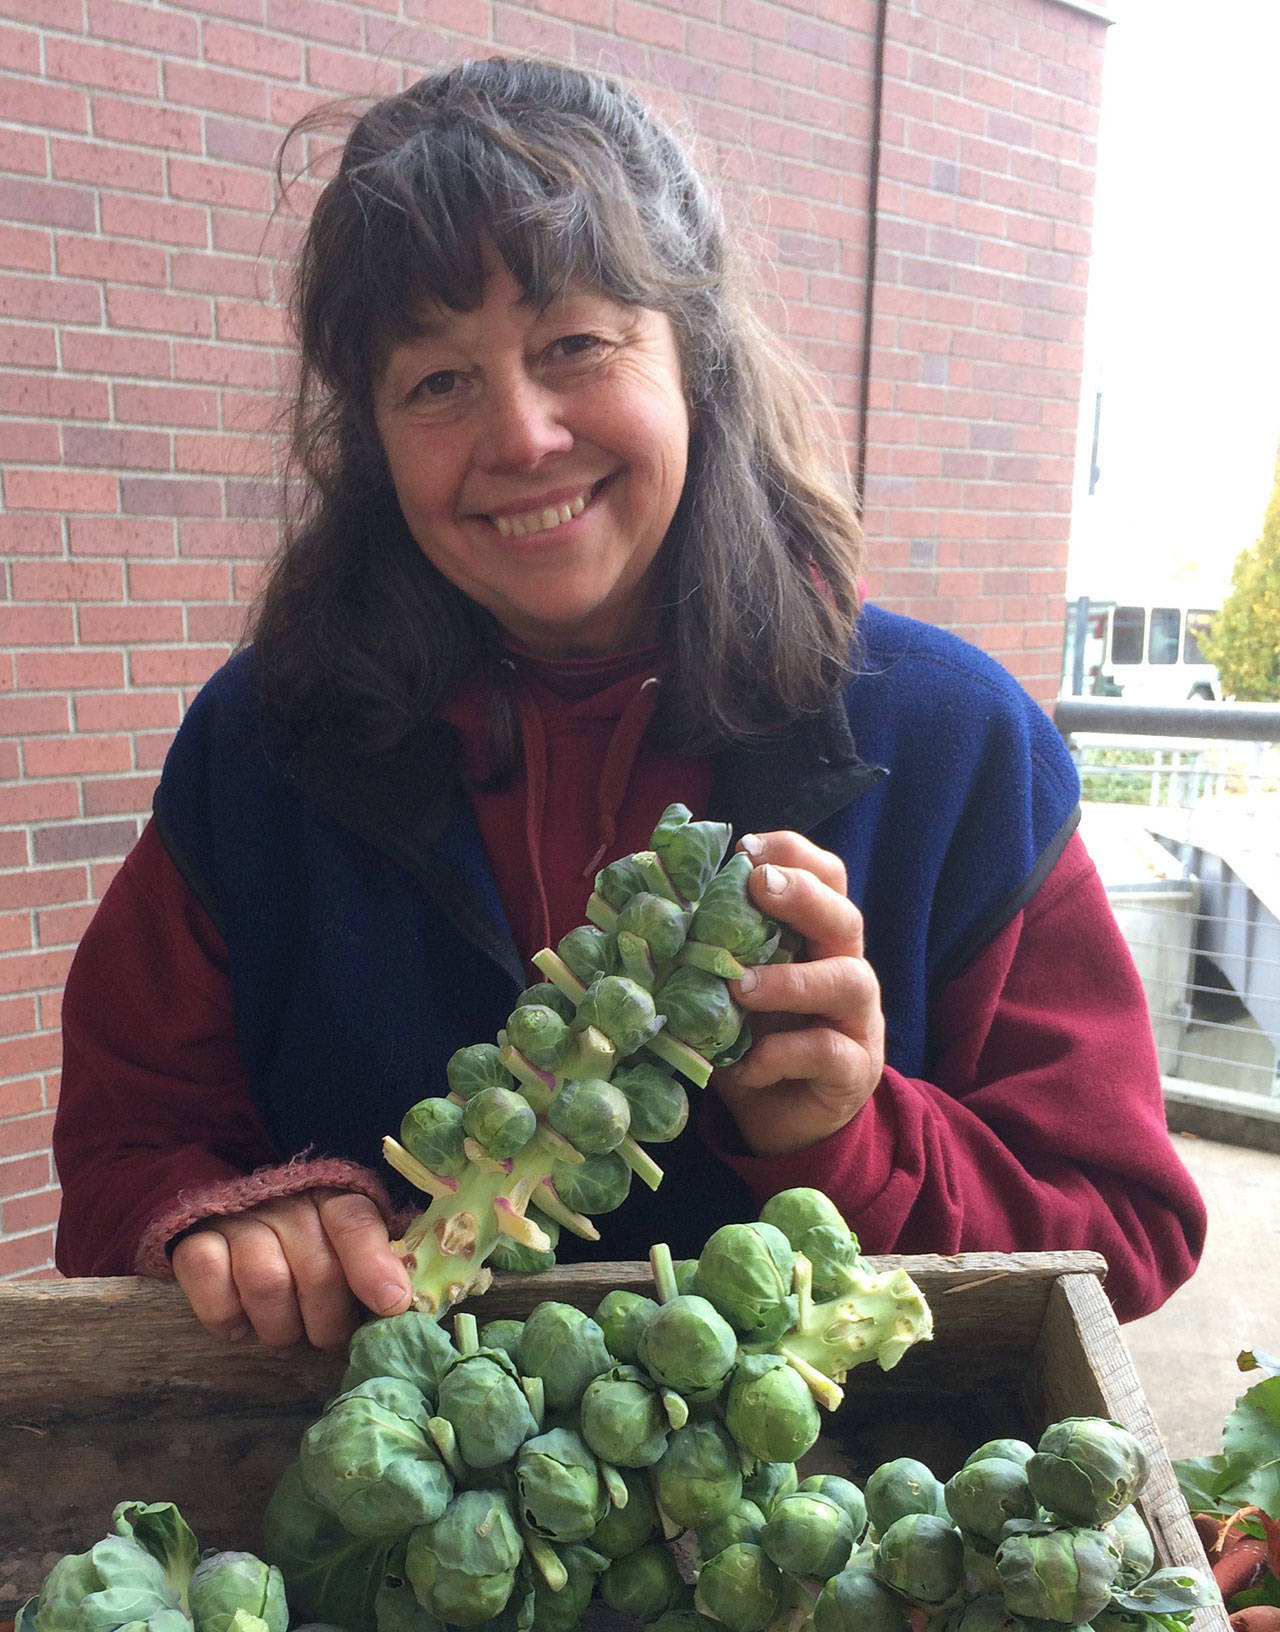 Christie Johnston of Johnston Family Farm holds Brussels sprouts at the Port Angeles Farmers Market. (Betsy Wharton/for Peninsula Daily News)